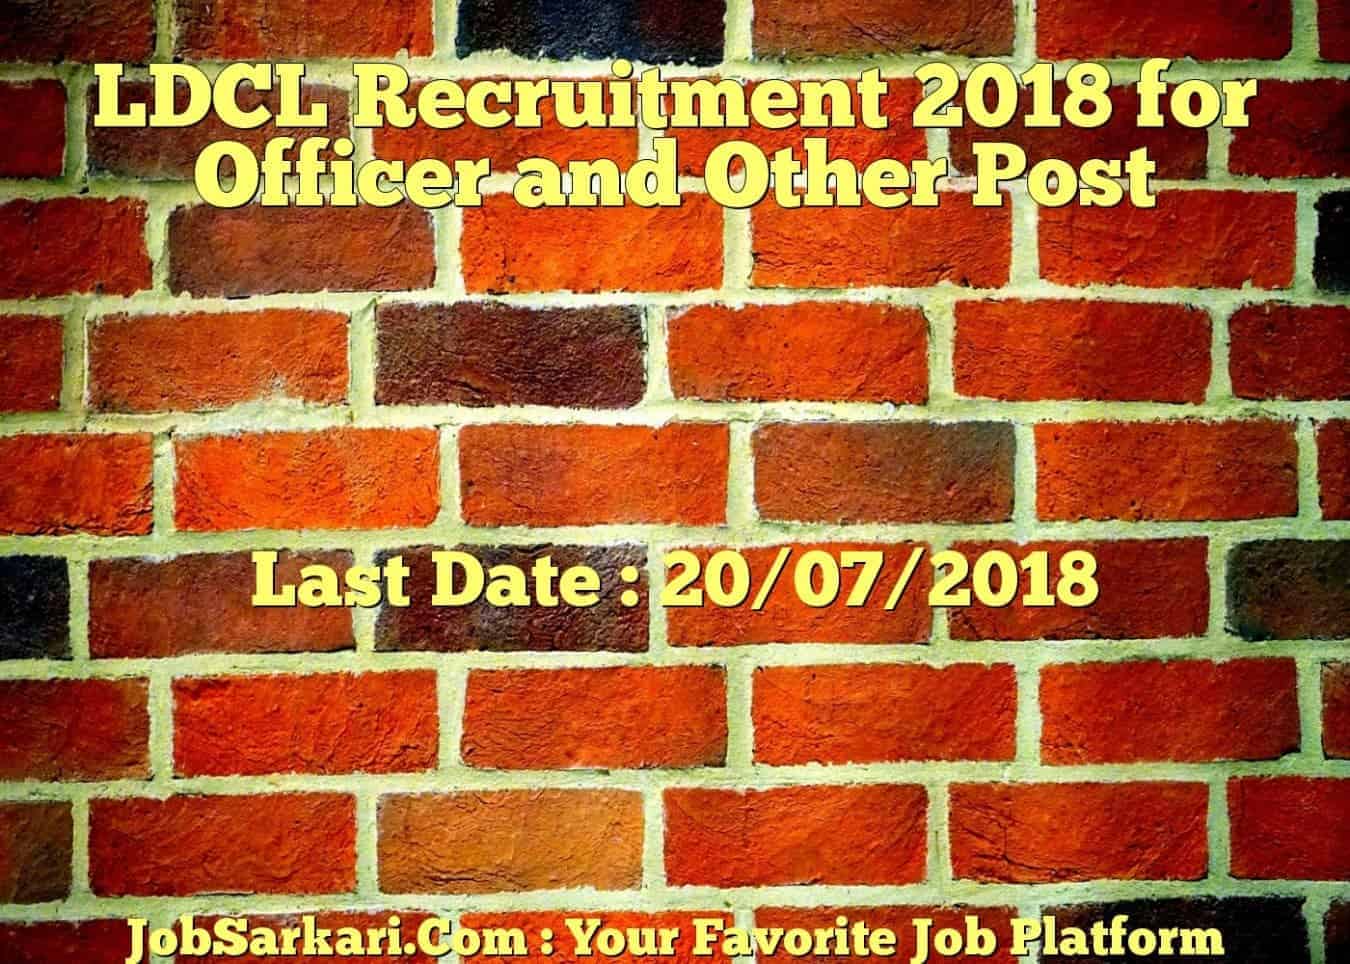 LDCL Recruitment 2018 for Officer and Other Post